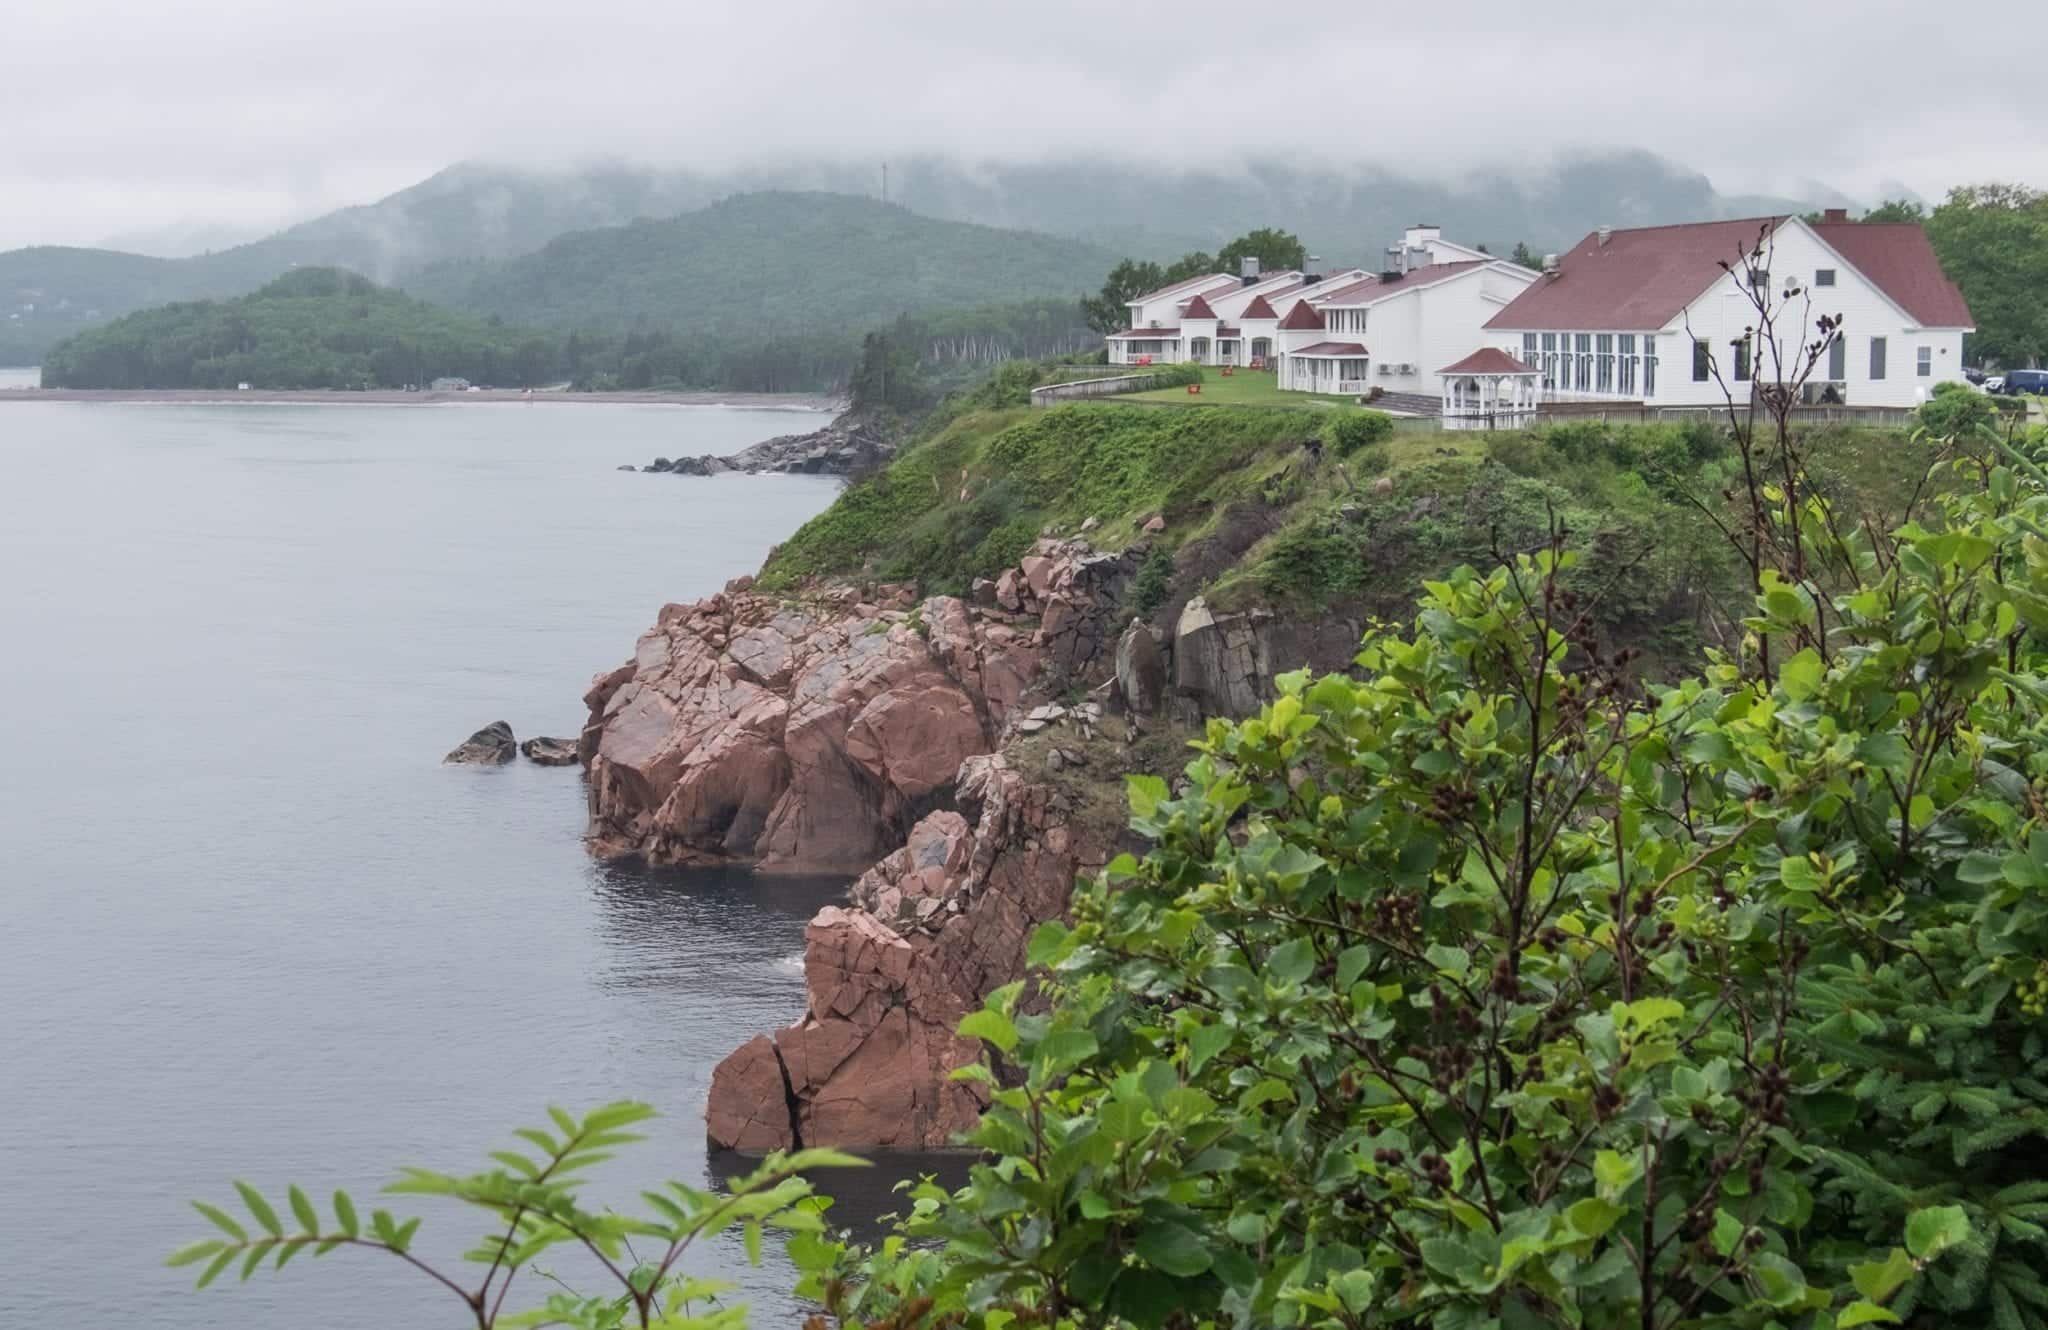 White cottages on top of red-brown cliffs among green vegetation, looking mysterious in the mist.